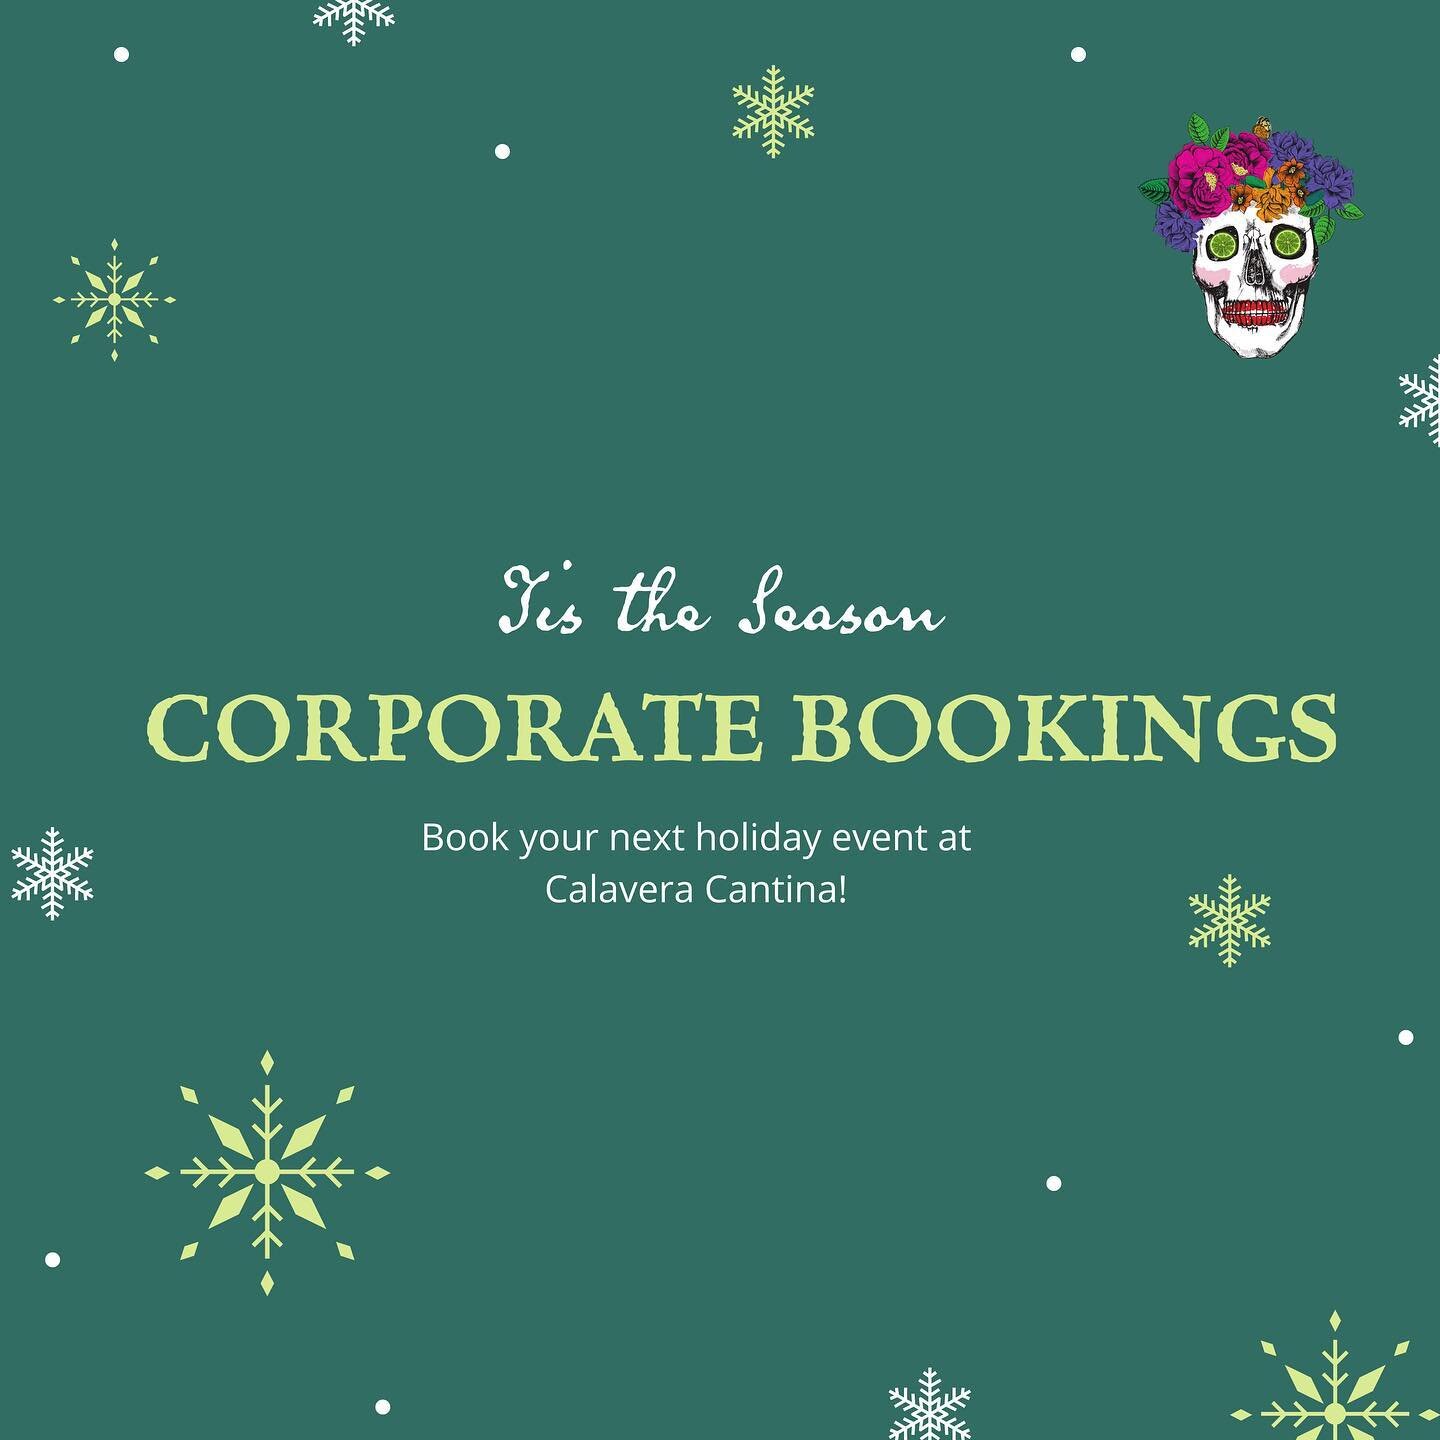 Let Calavera Cantina be part of your next holiday party! We will be offering a free &lsquo;Chef Experience&rsquo; worth $500 with the booking of a corporate event. Restrictions do apply. Contact us at info@starbellygroup.com for more information.